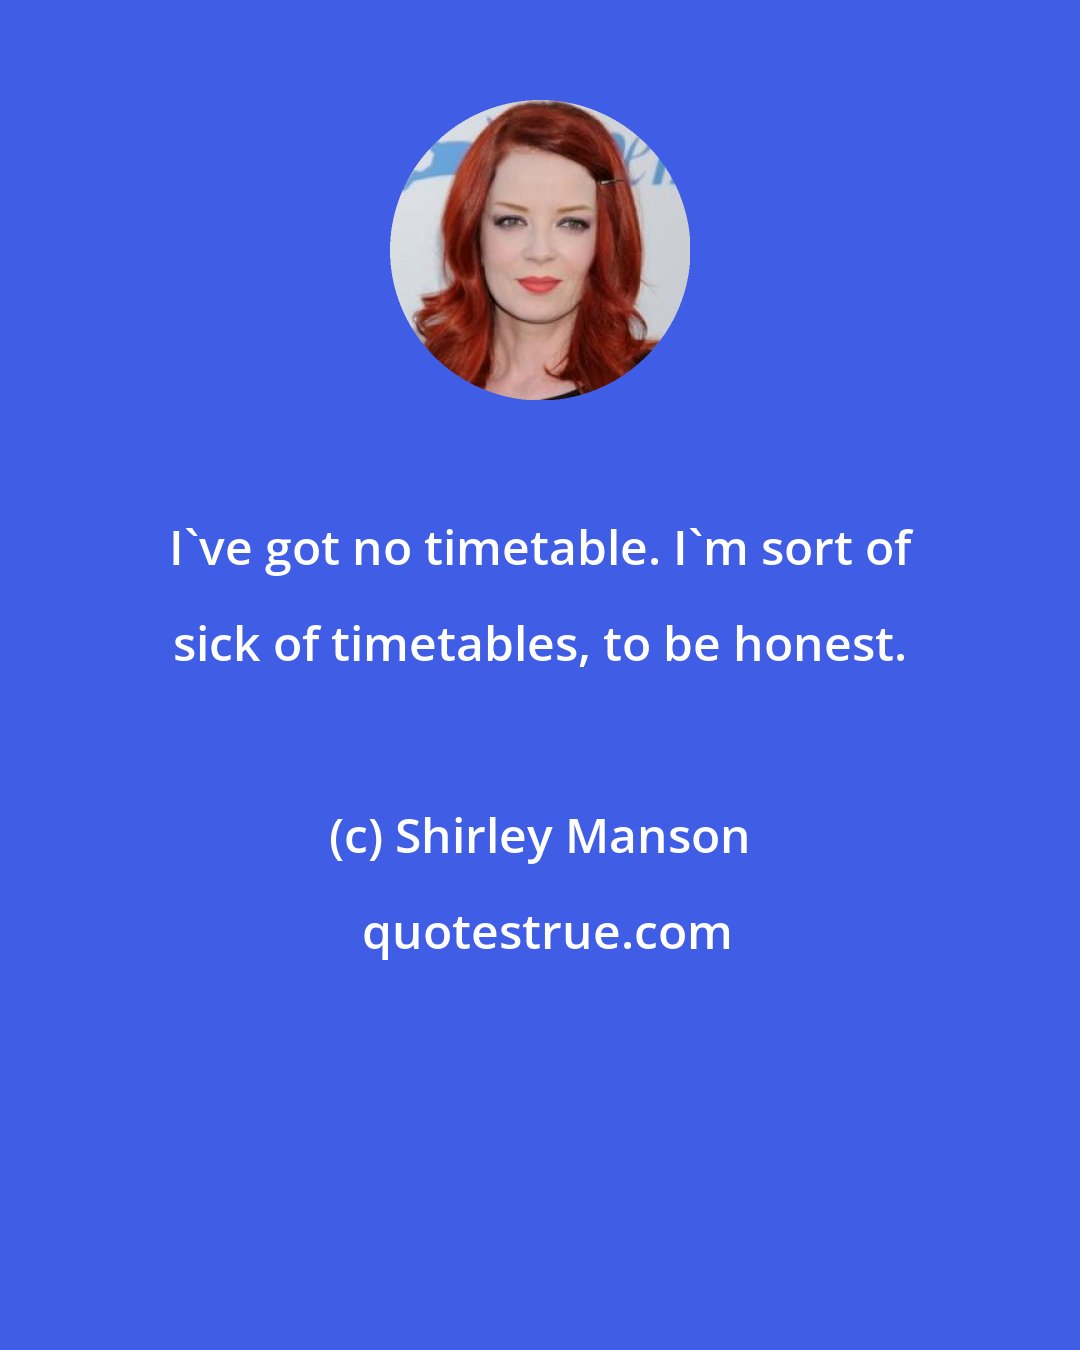 Shirley Manson: I've got no timetable. I'm sort of sick of timetables, to be honest.